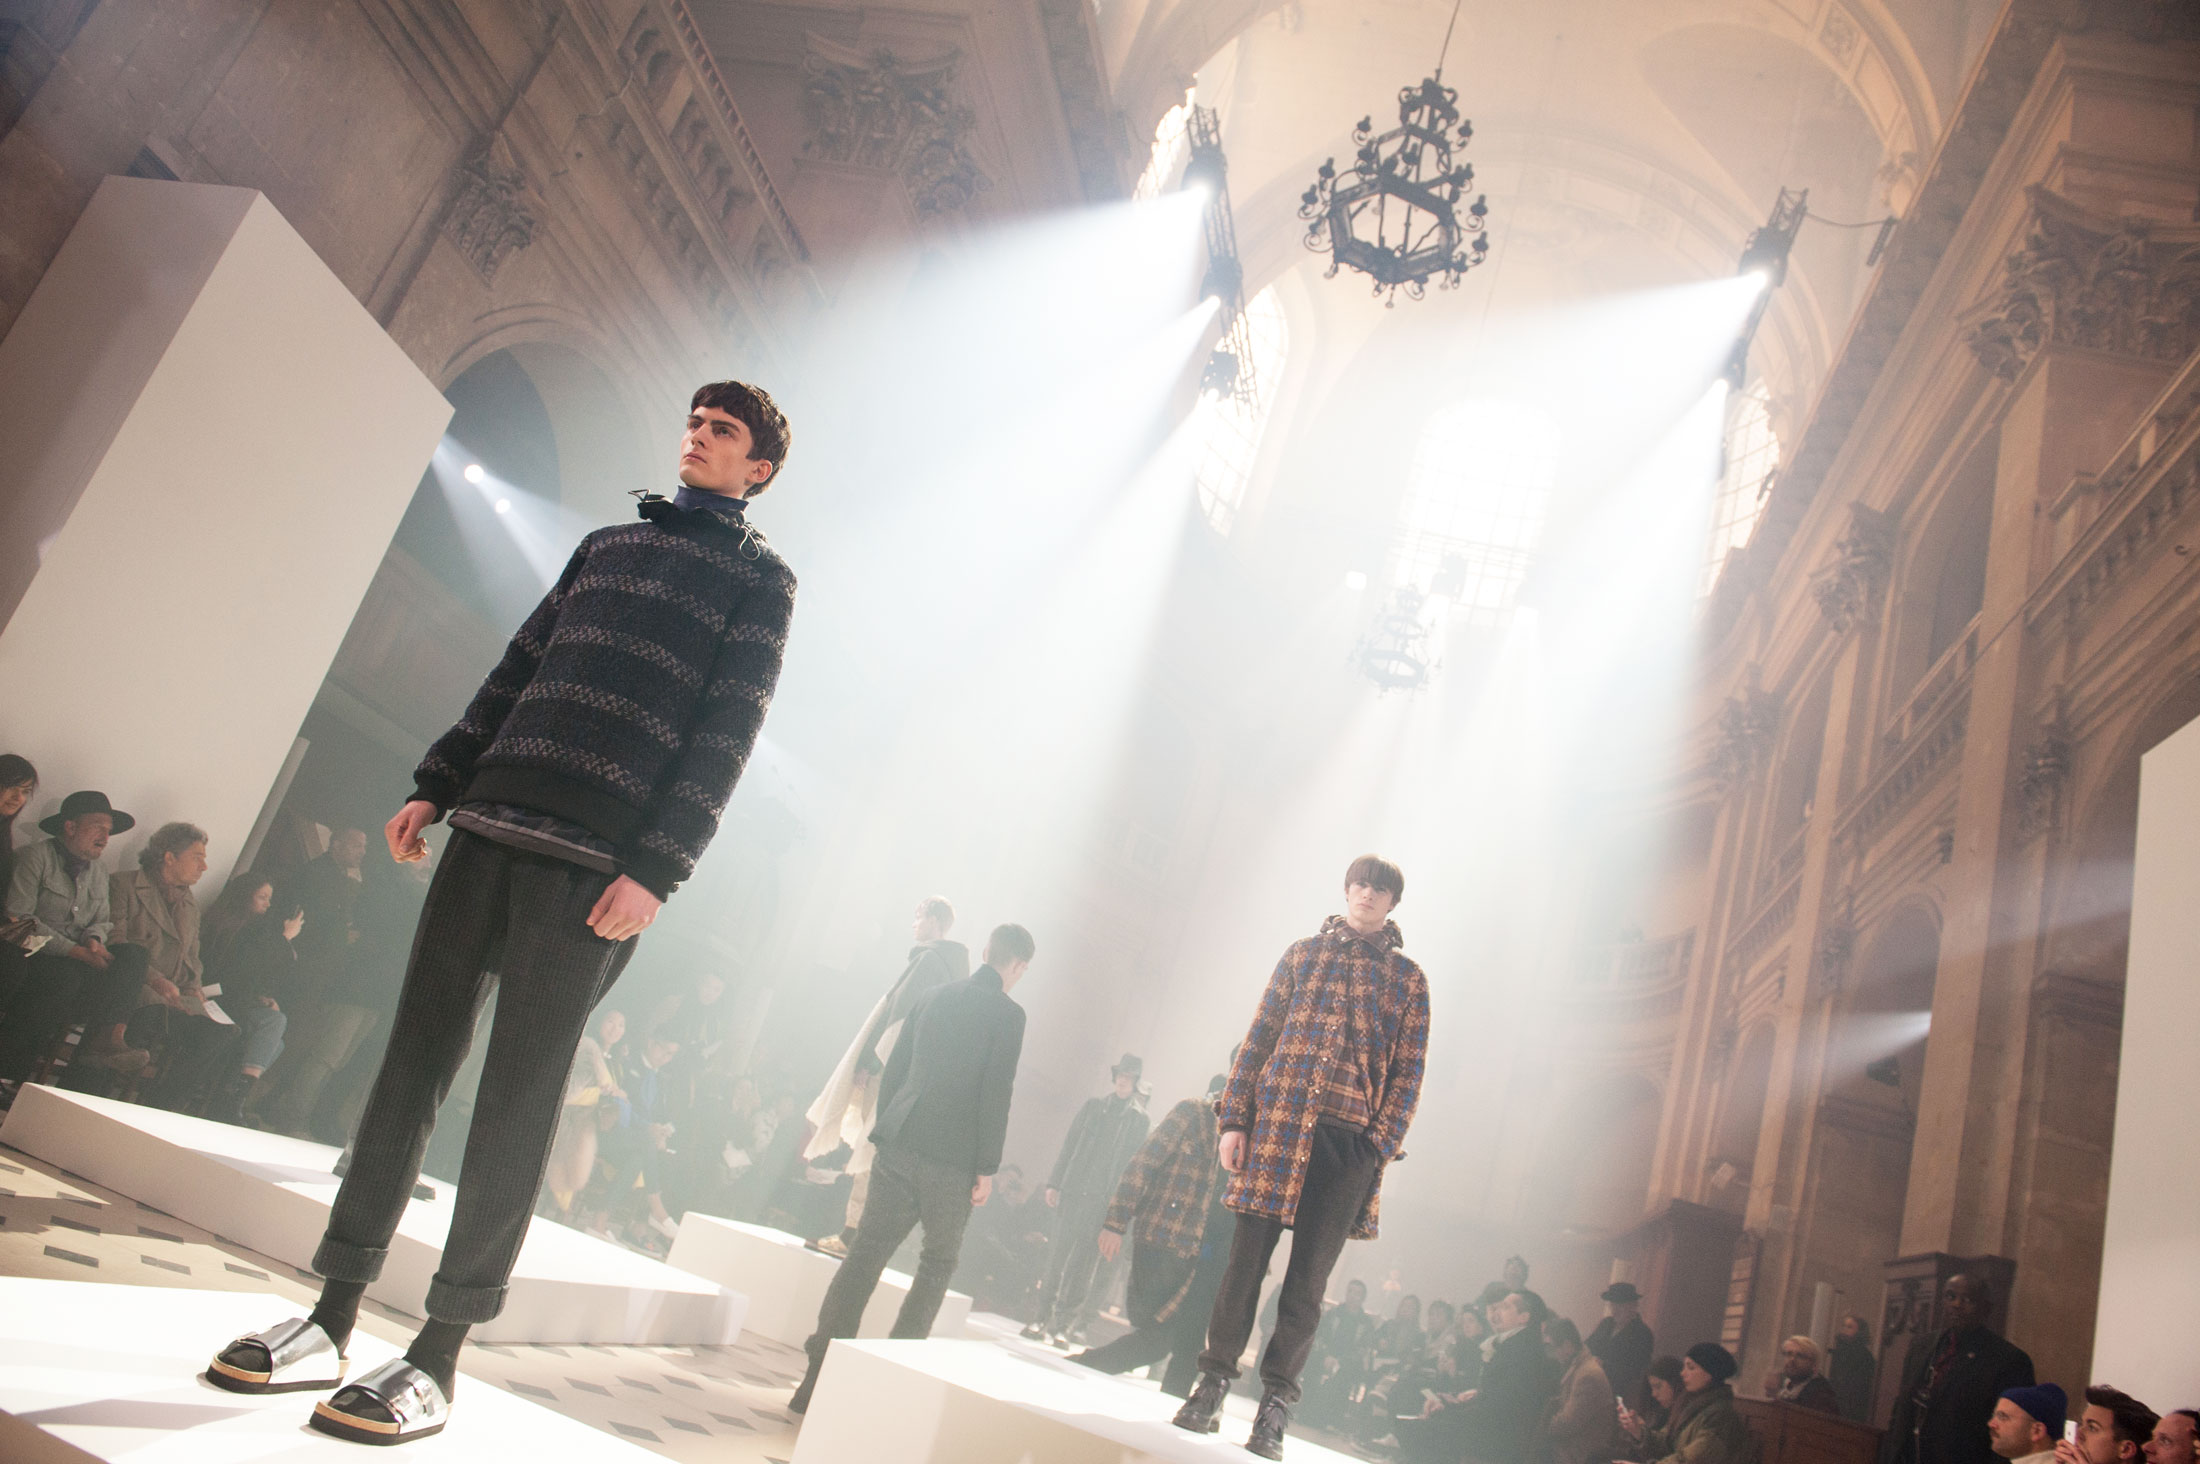 Louis Vuitton Opens Canada's 2nd Men's Ready-to-Wear Concession at